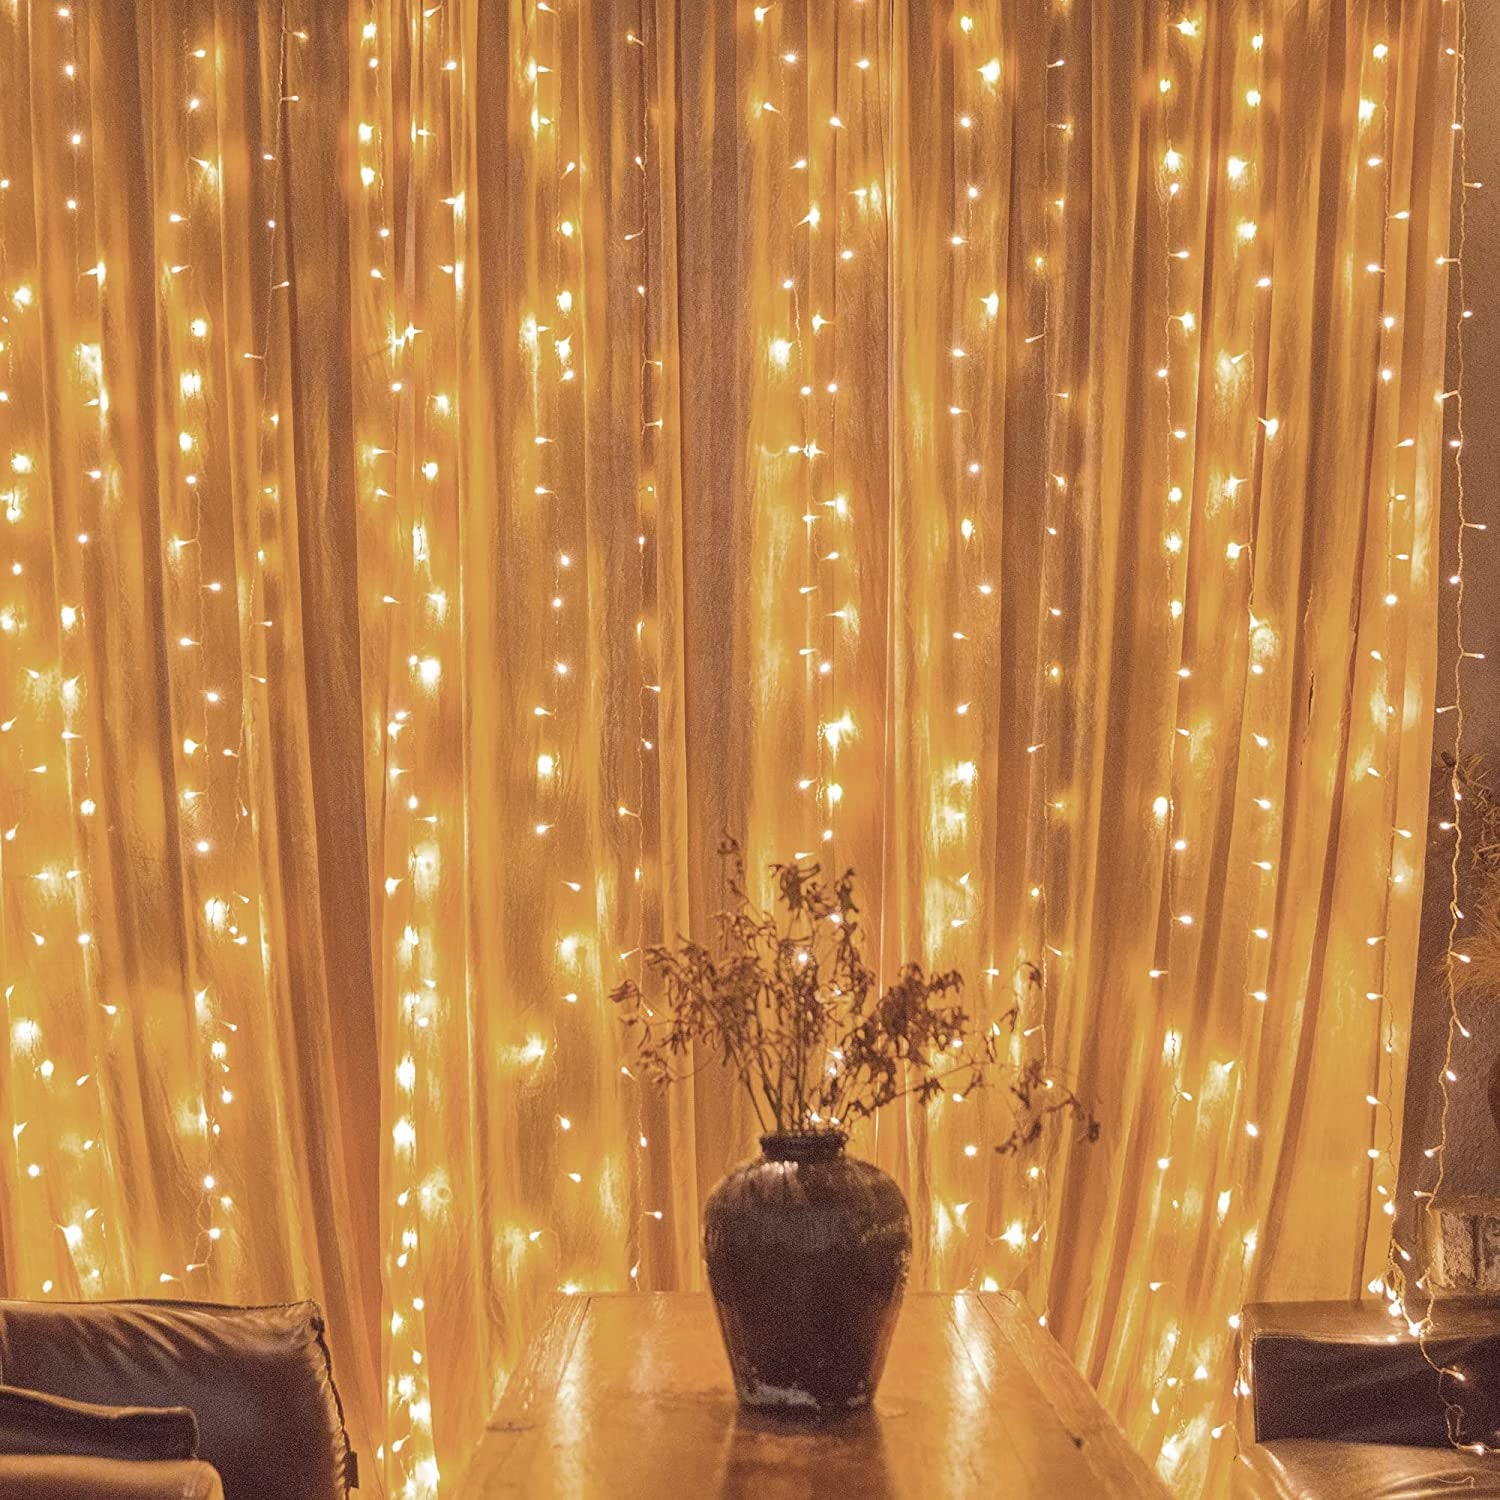 A long string of fairy lights draped over a window curtain 